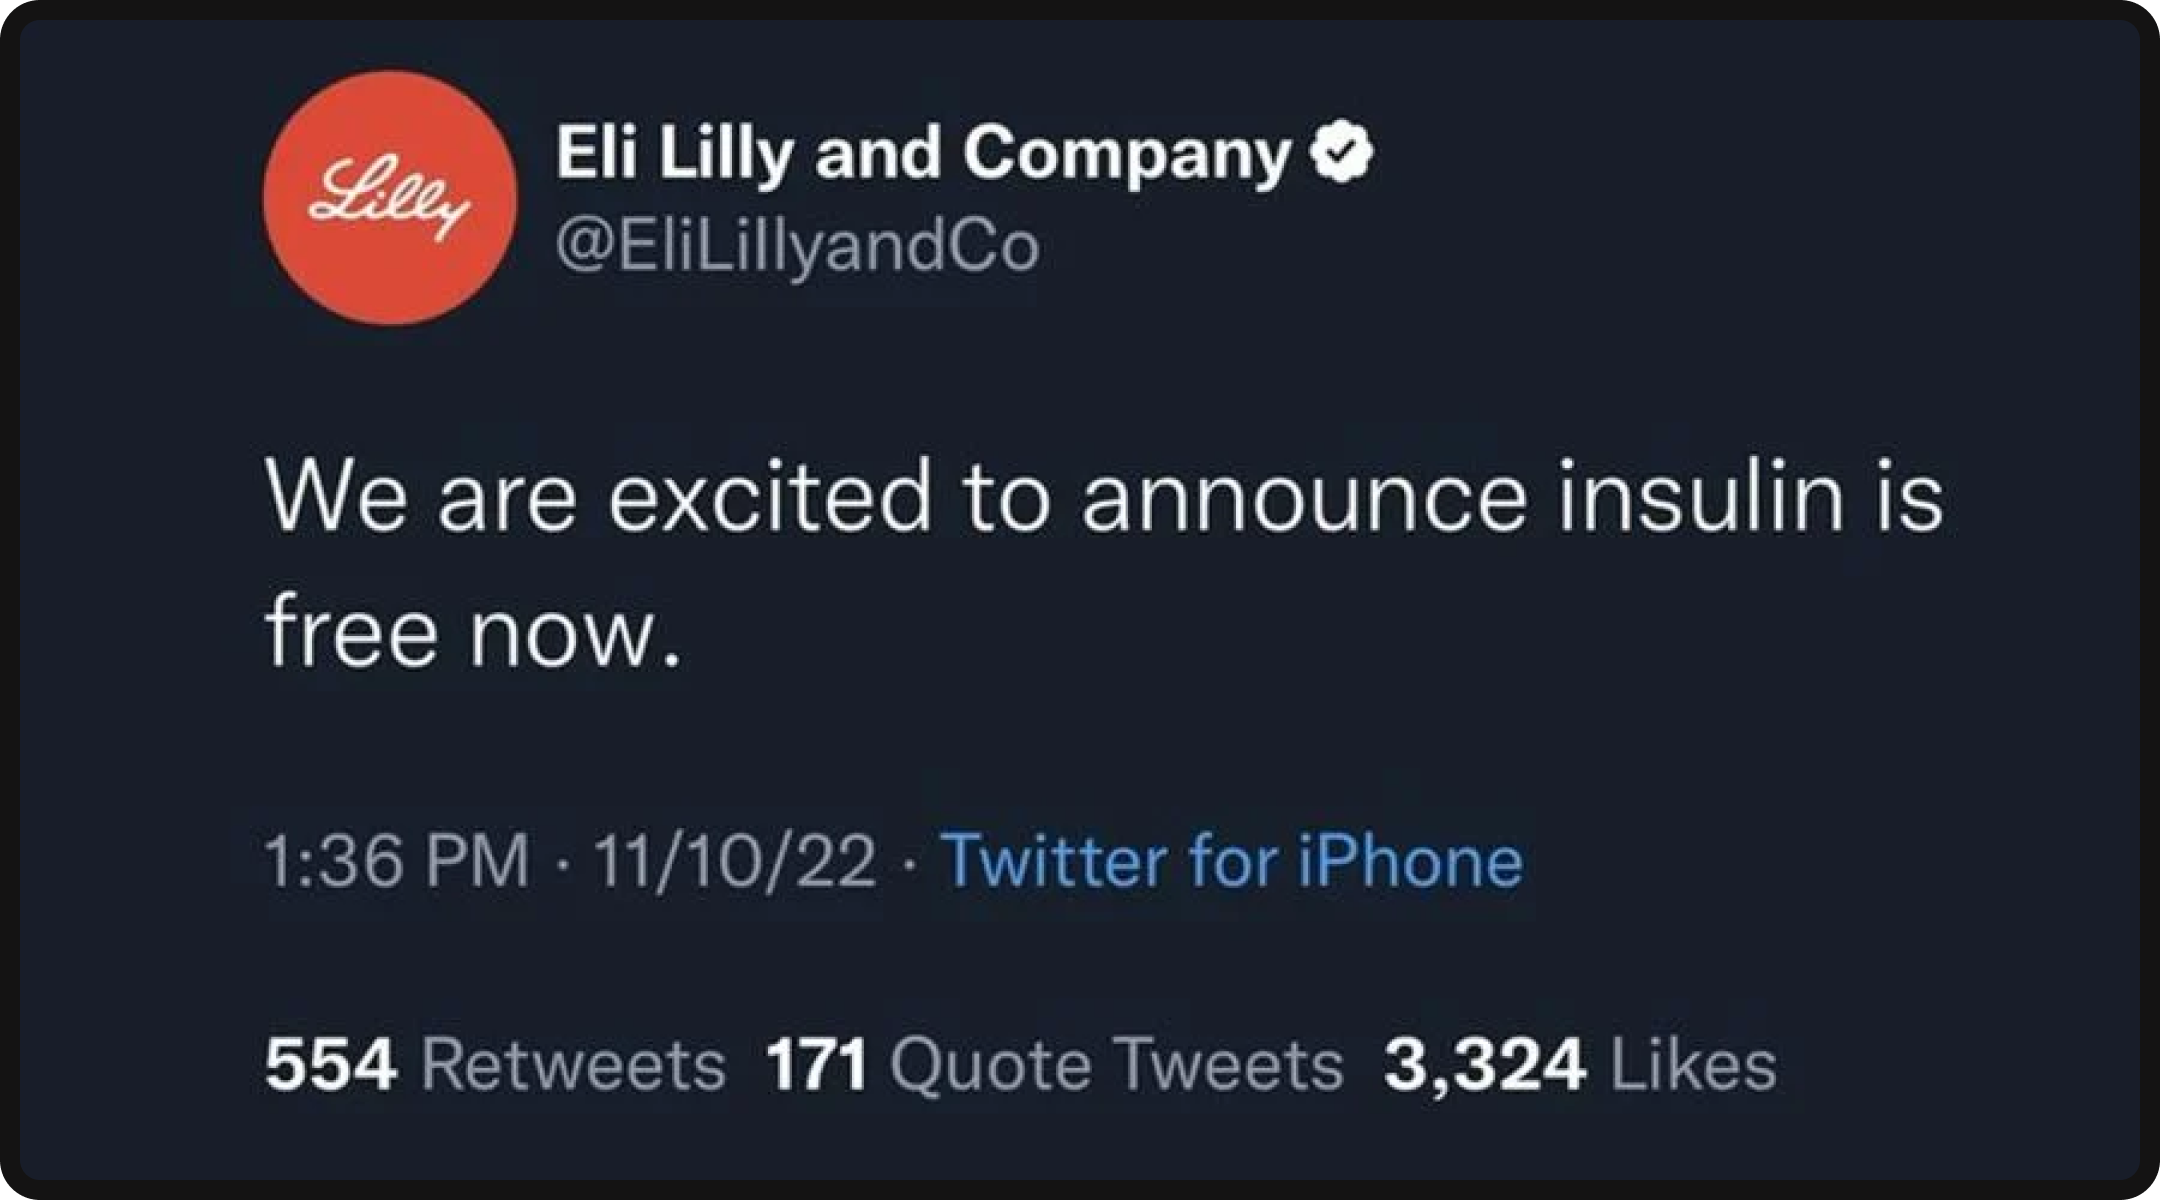 Eli Lilly and Company's fake tweet about free insulin.